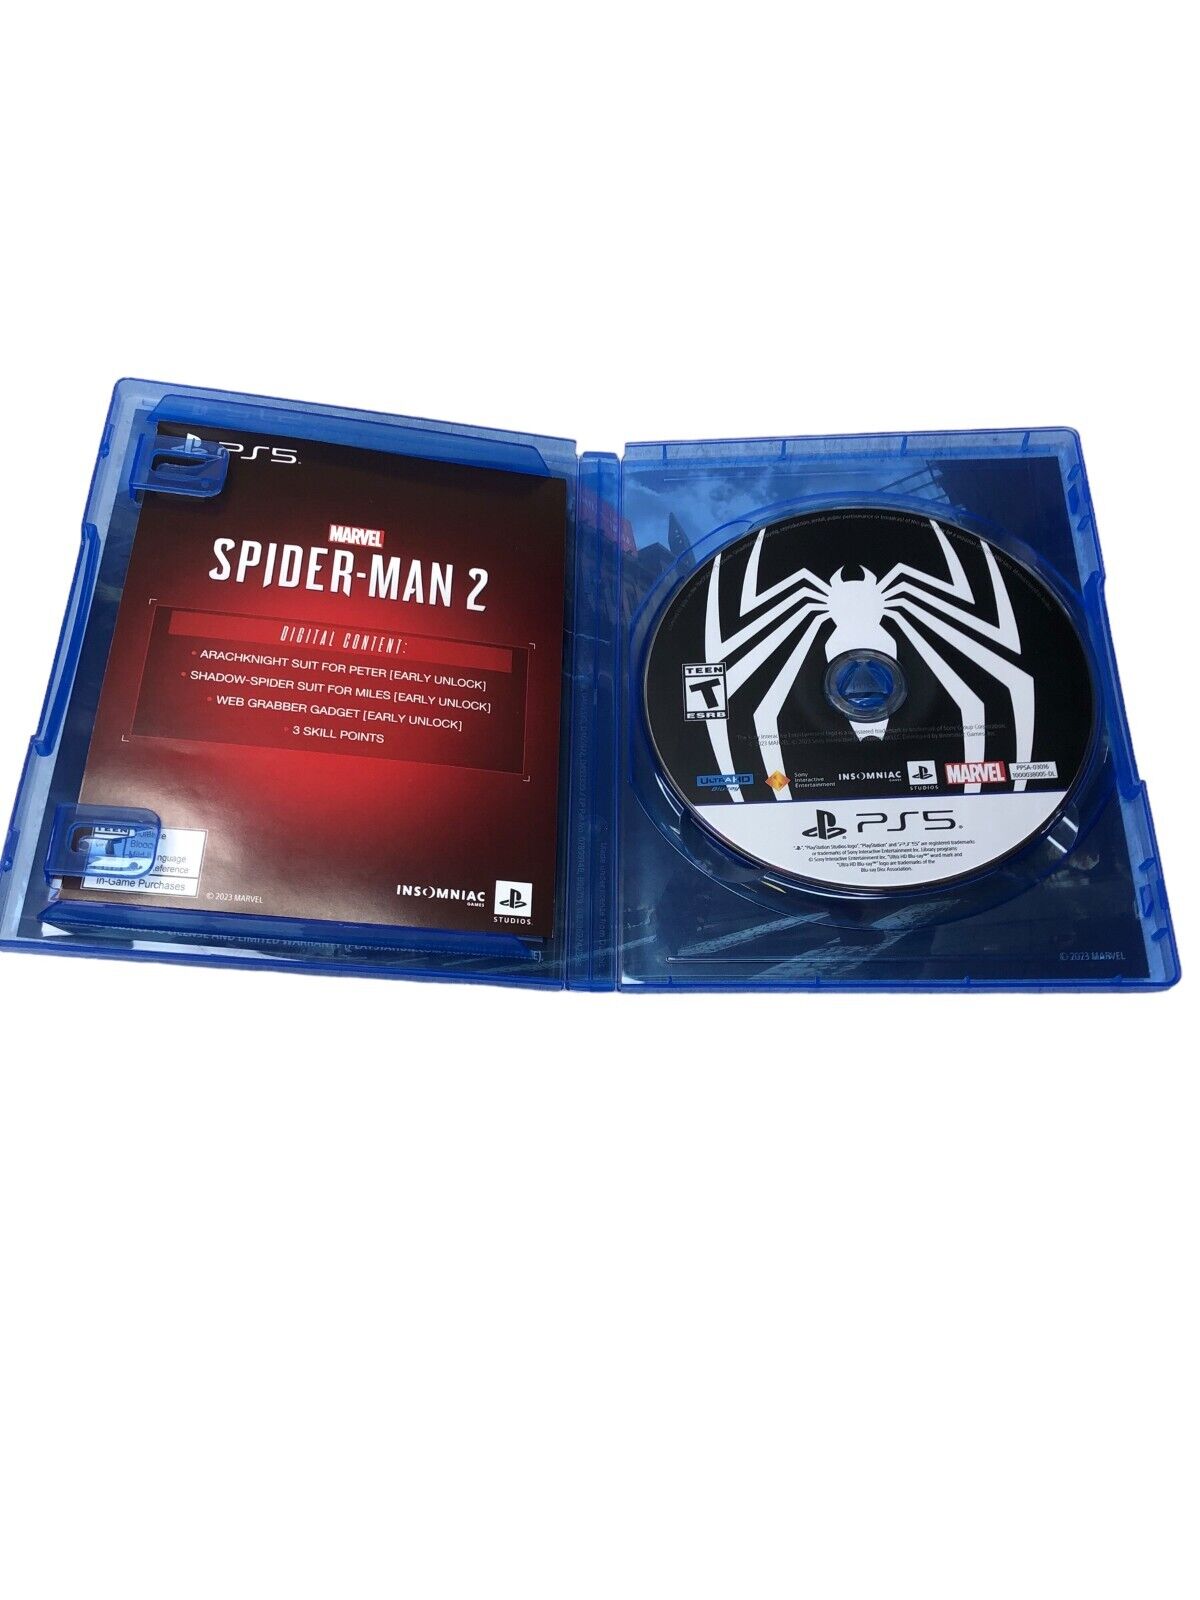 Marvel's Spider-Man 2 Launch Edition - PlayStation 5 -BRAND NEW